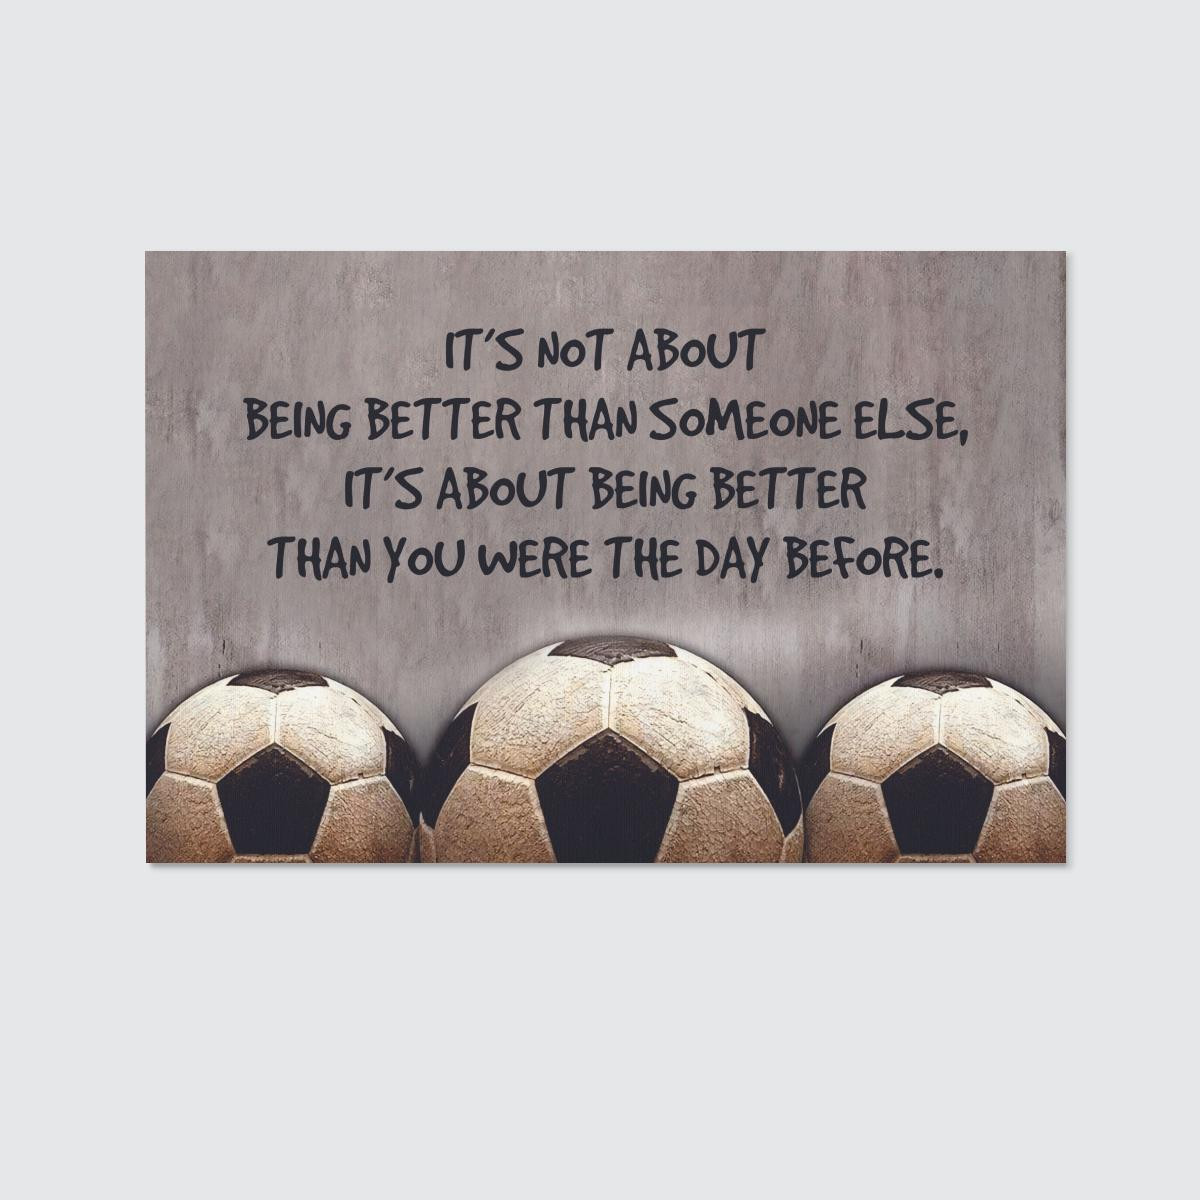 It's not about being better than someone else Soccer Canvas Prints Wall Art